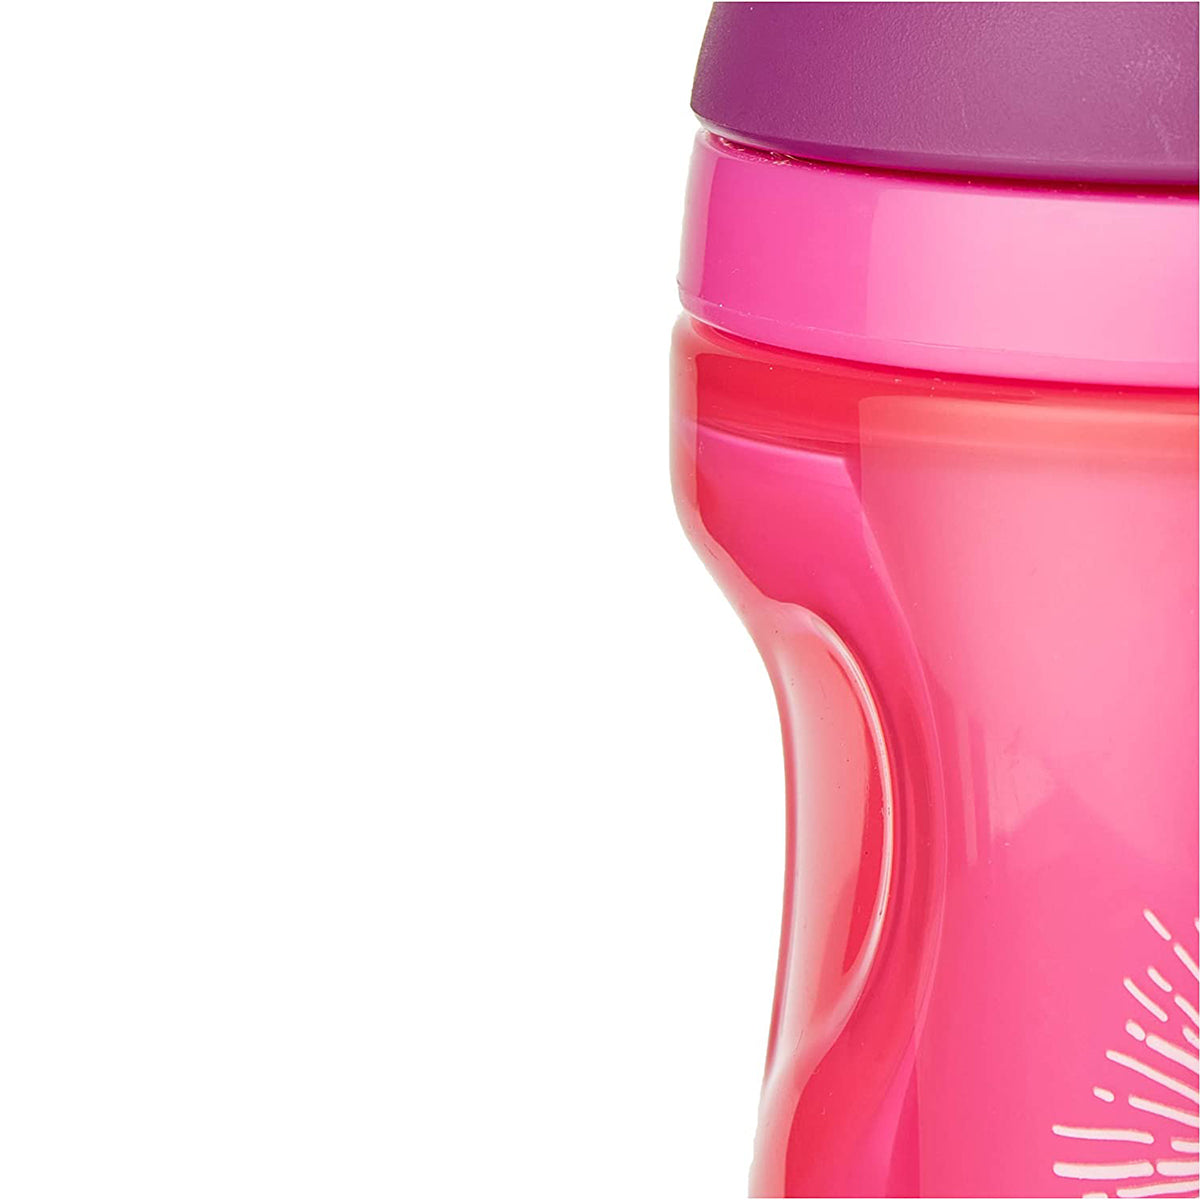 Tommee Tippee Insulated Drinking Cup, 260ml